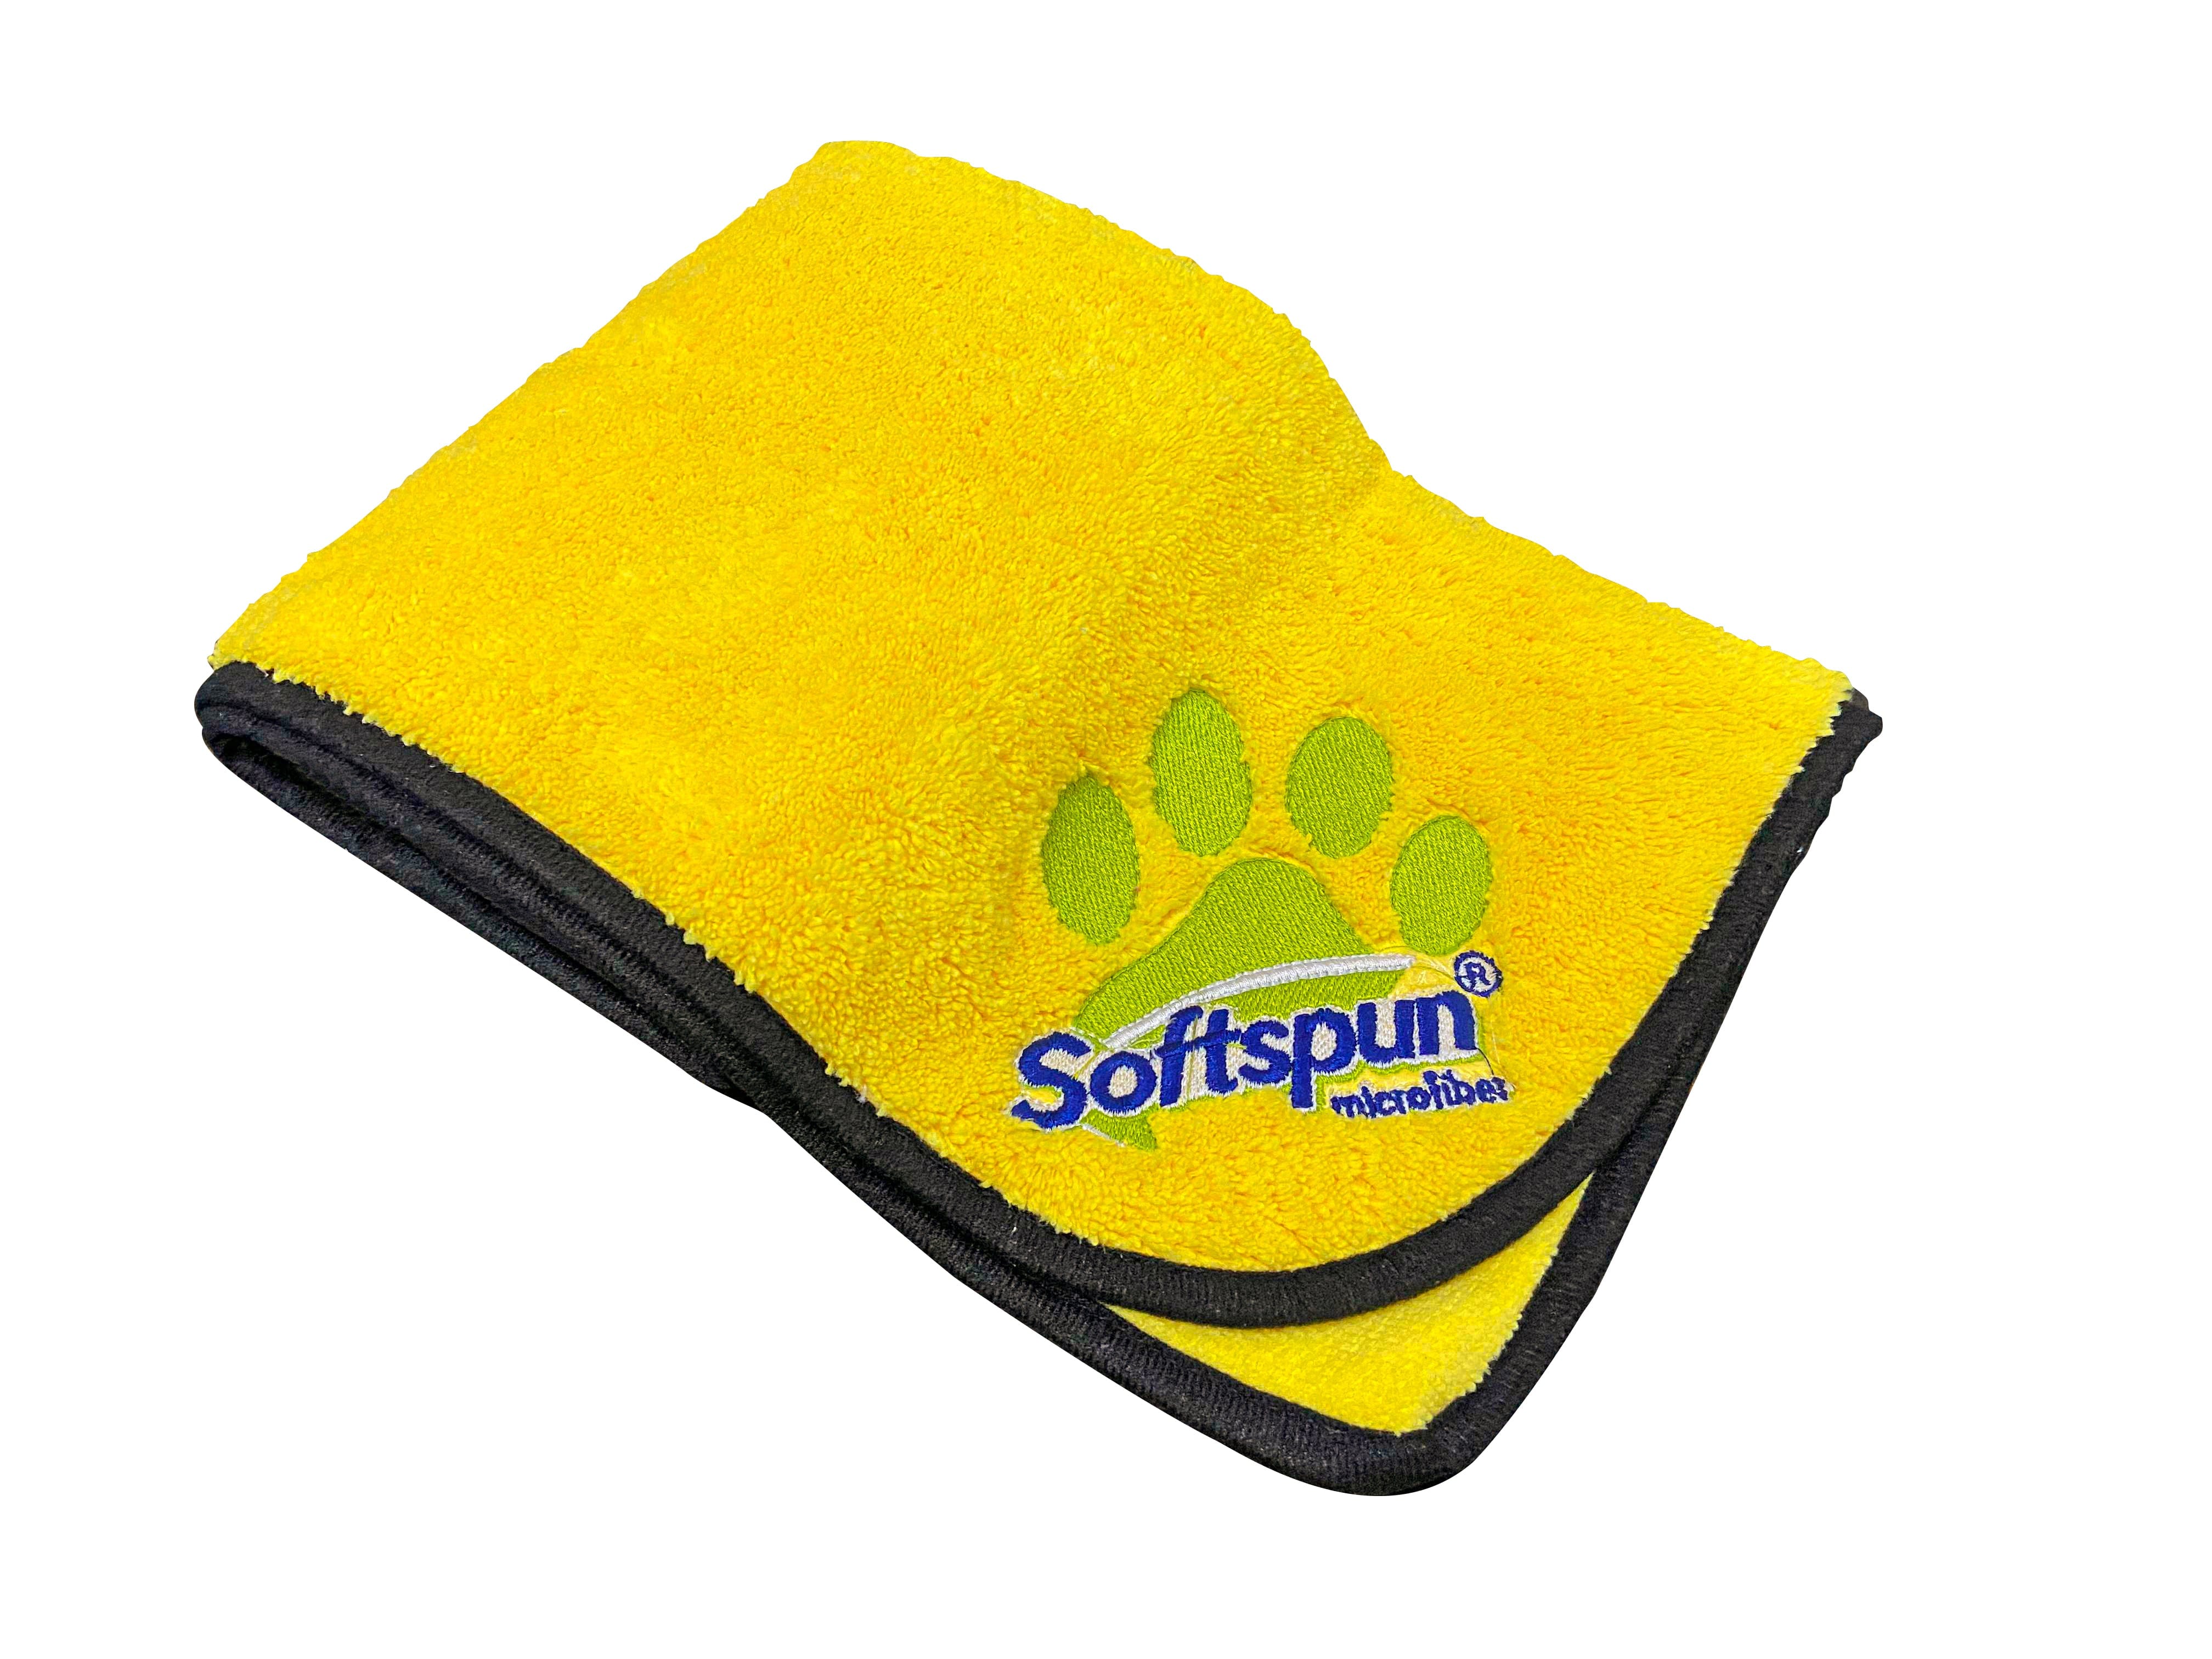 SOFTSPUN Microfiber Pet Towel 380 GSM. Ultra-Absorbent for Drying Pets Quickly. Quick-Drying, Machine Washable, Ultra-Soft for Small Dogs & Cats of All Breeds.